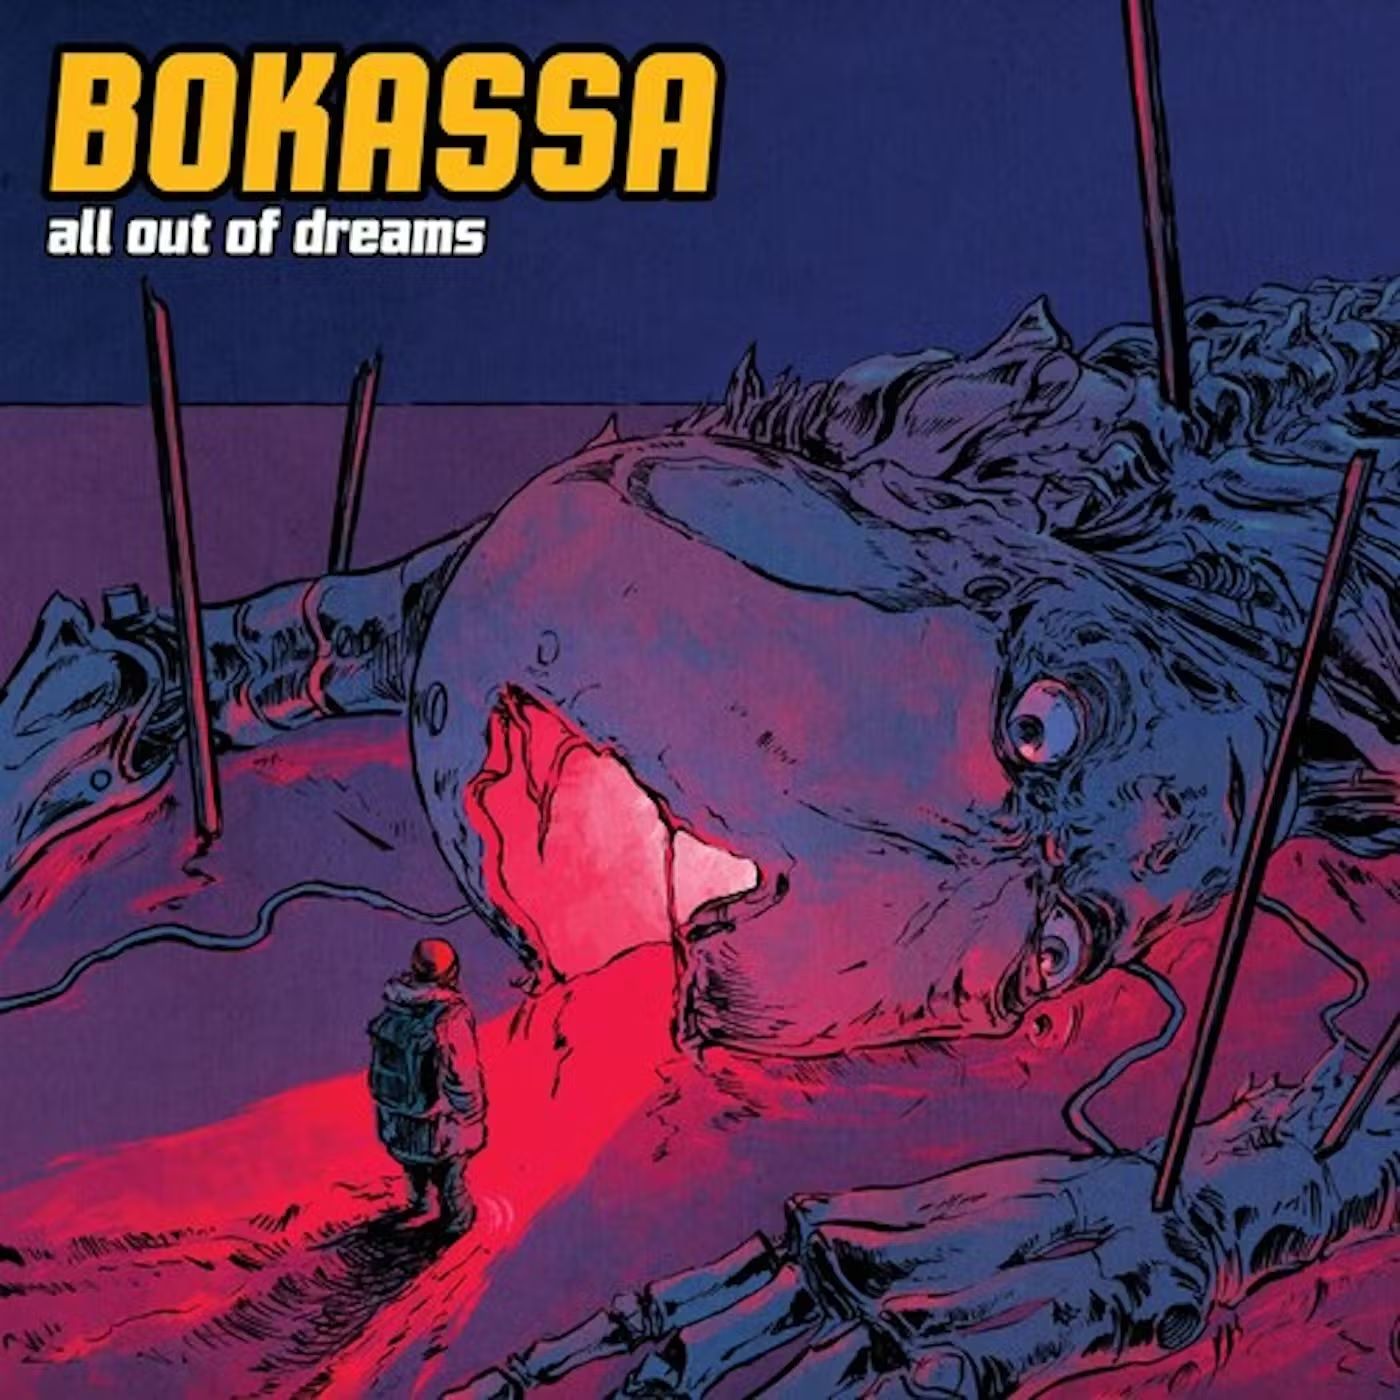 Bokassa - All Out Of Dreams - CD - New